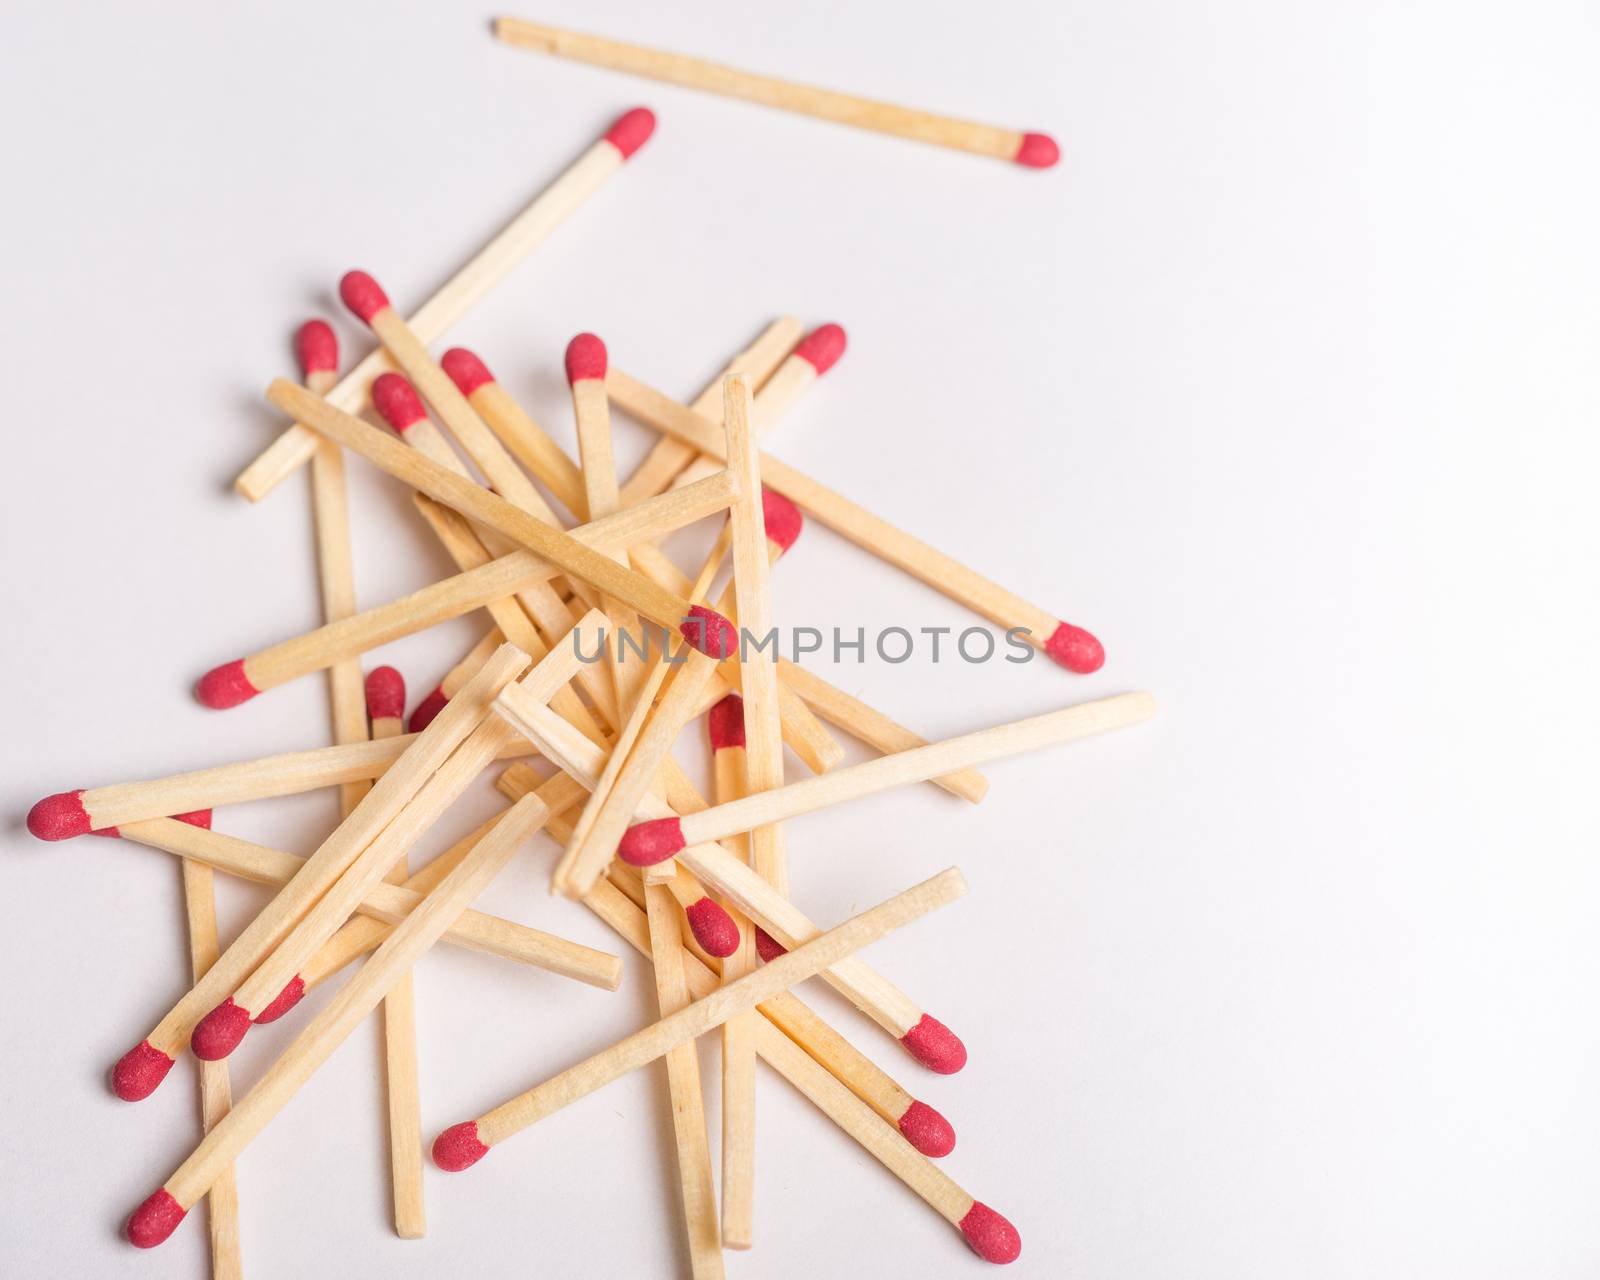 Matches isolated on white background with copy space.